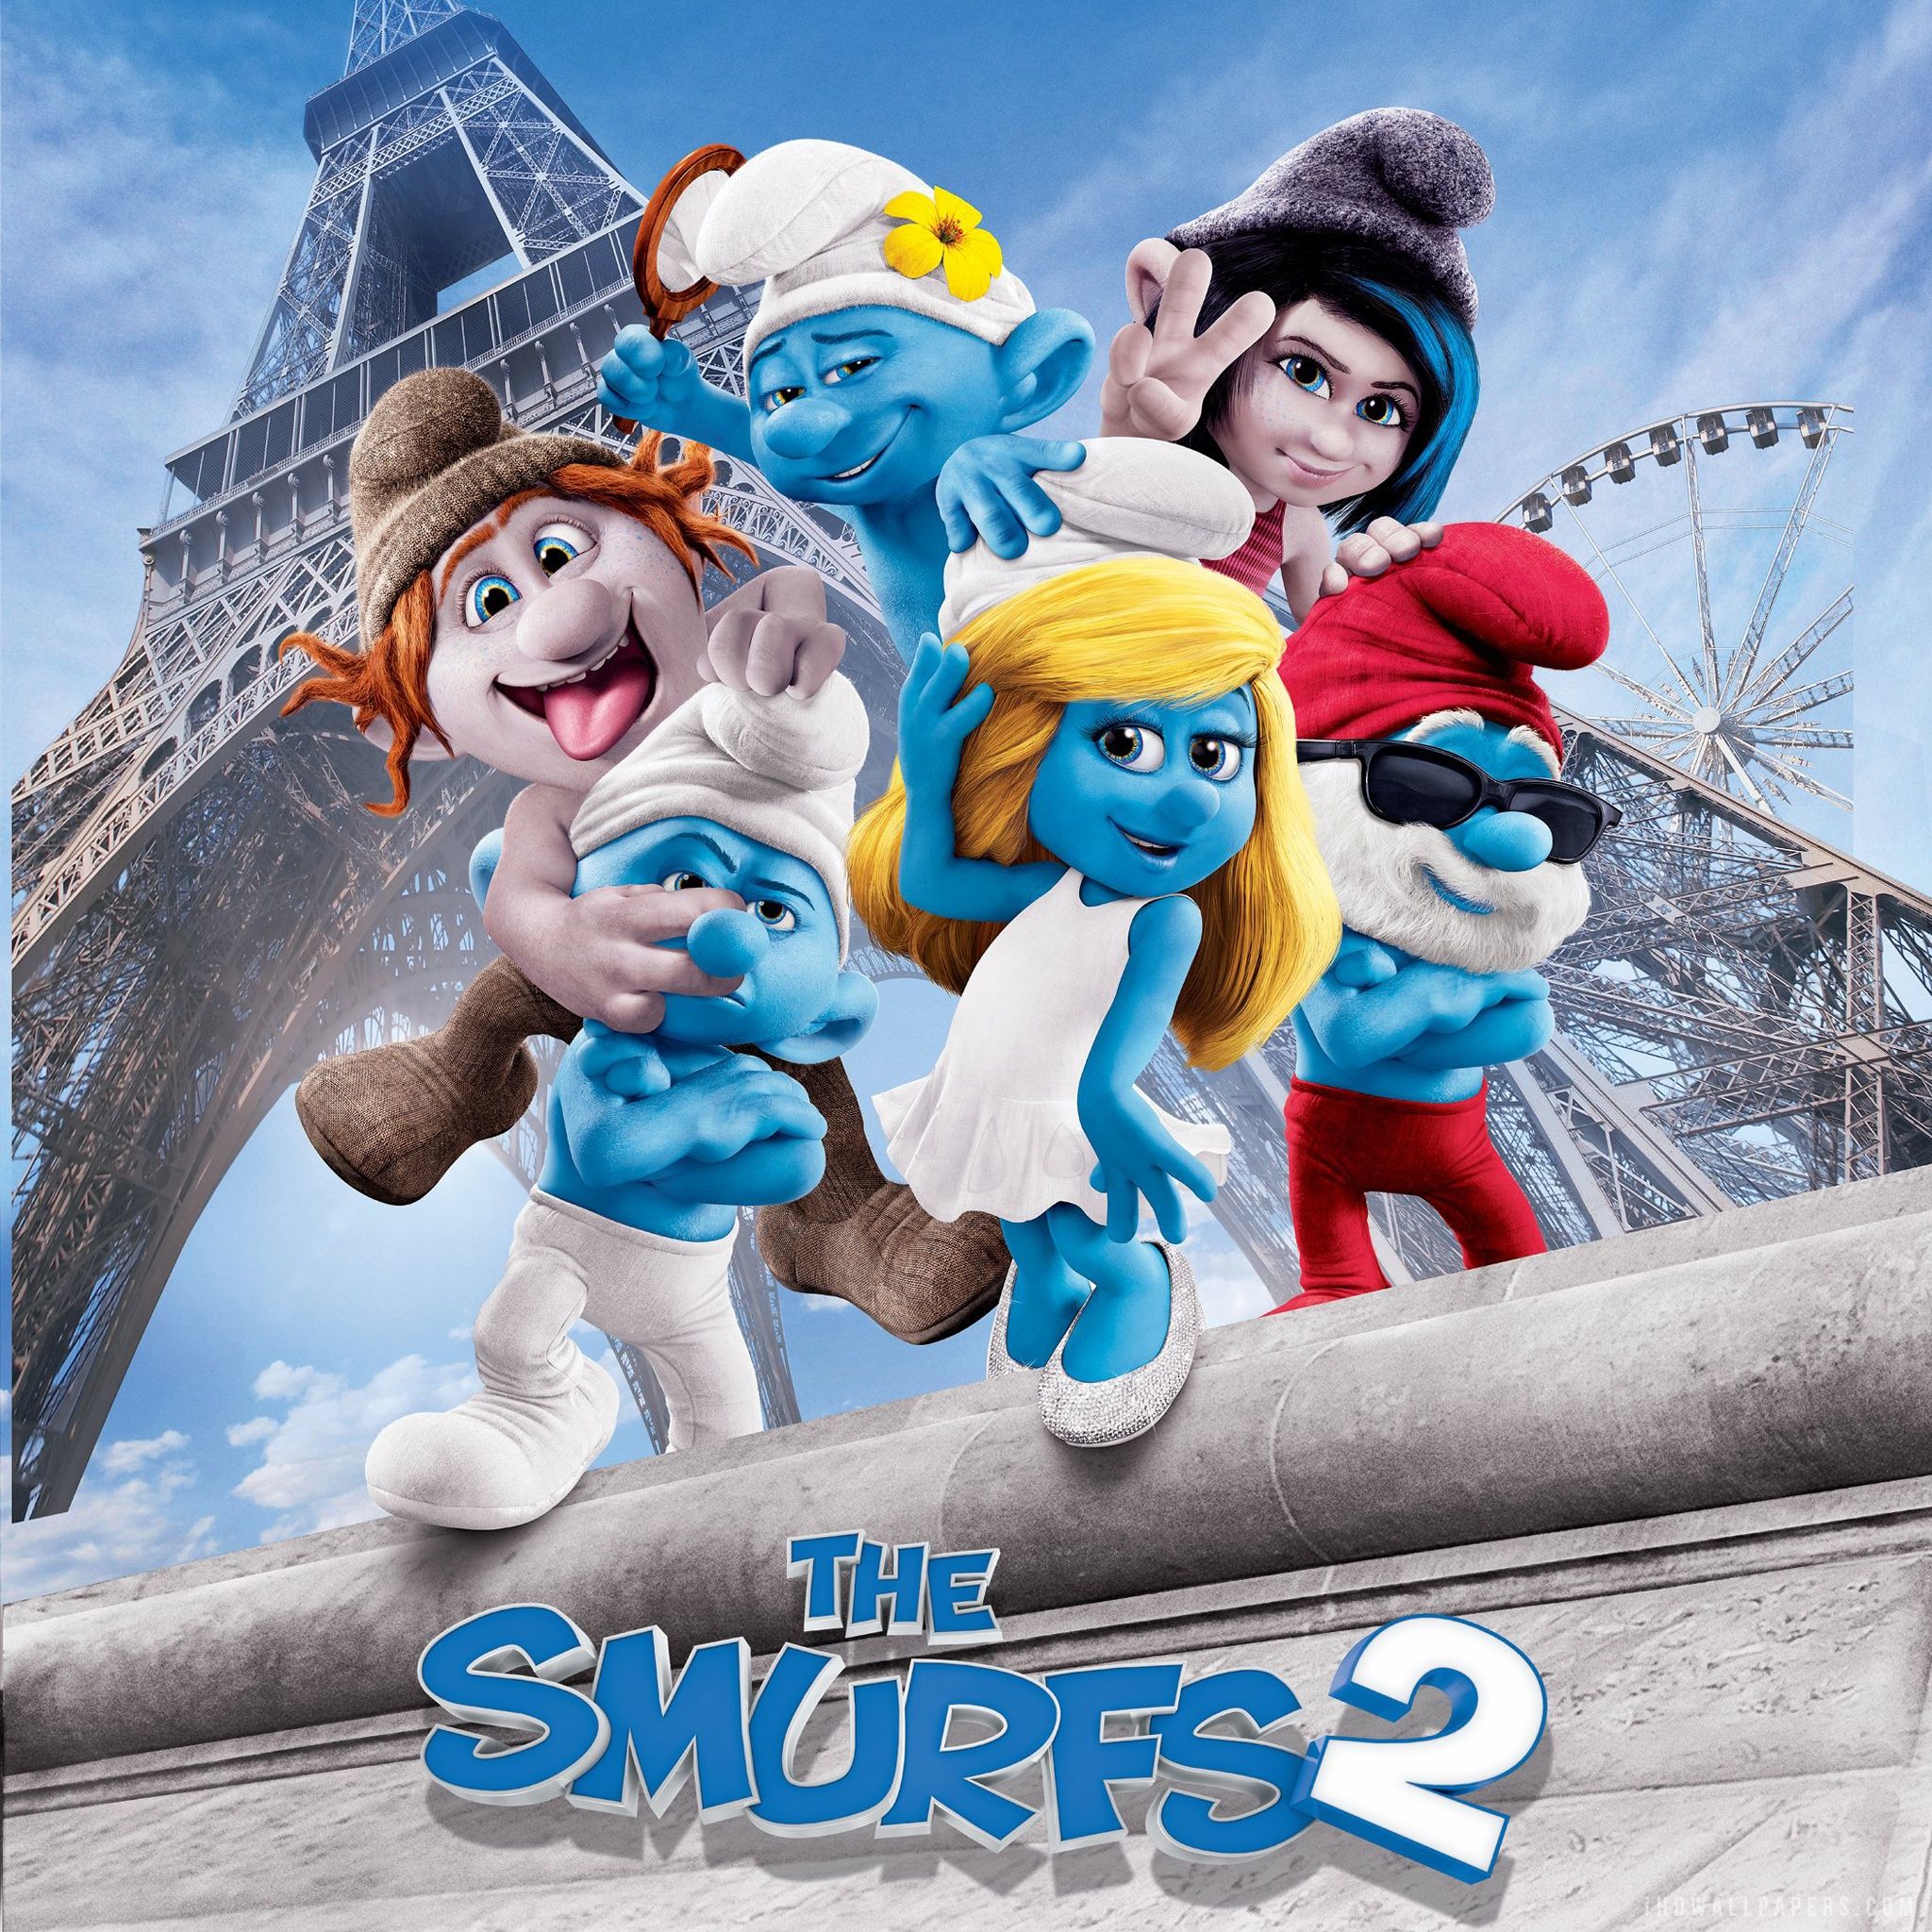 The Smurfs 2 HD Wallpaper - iHD Backgrounds